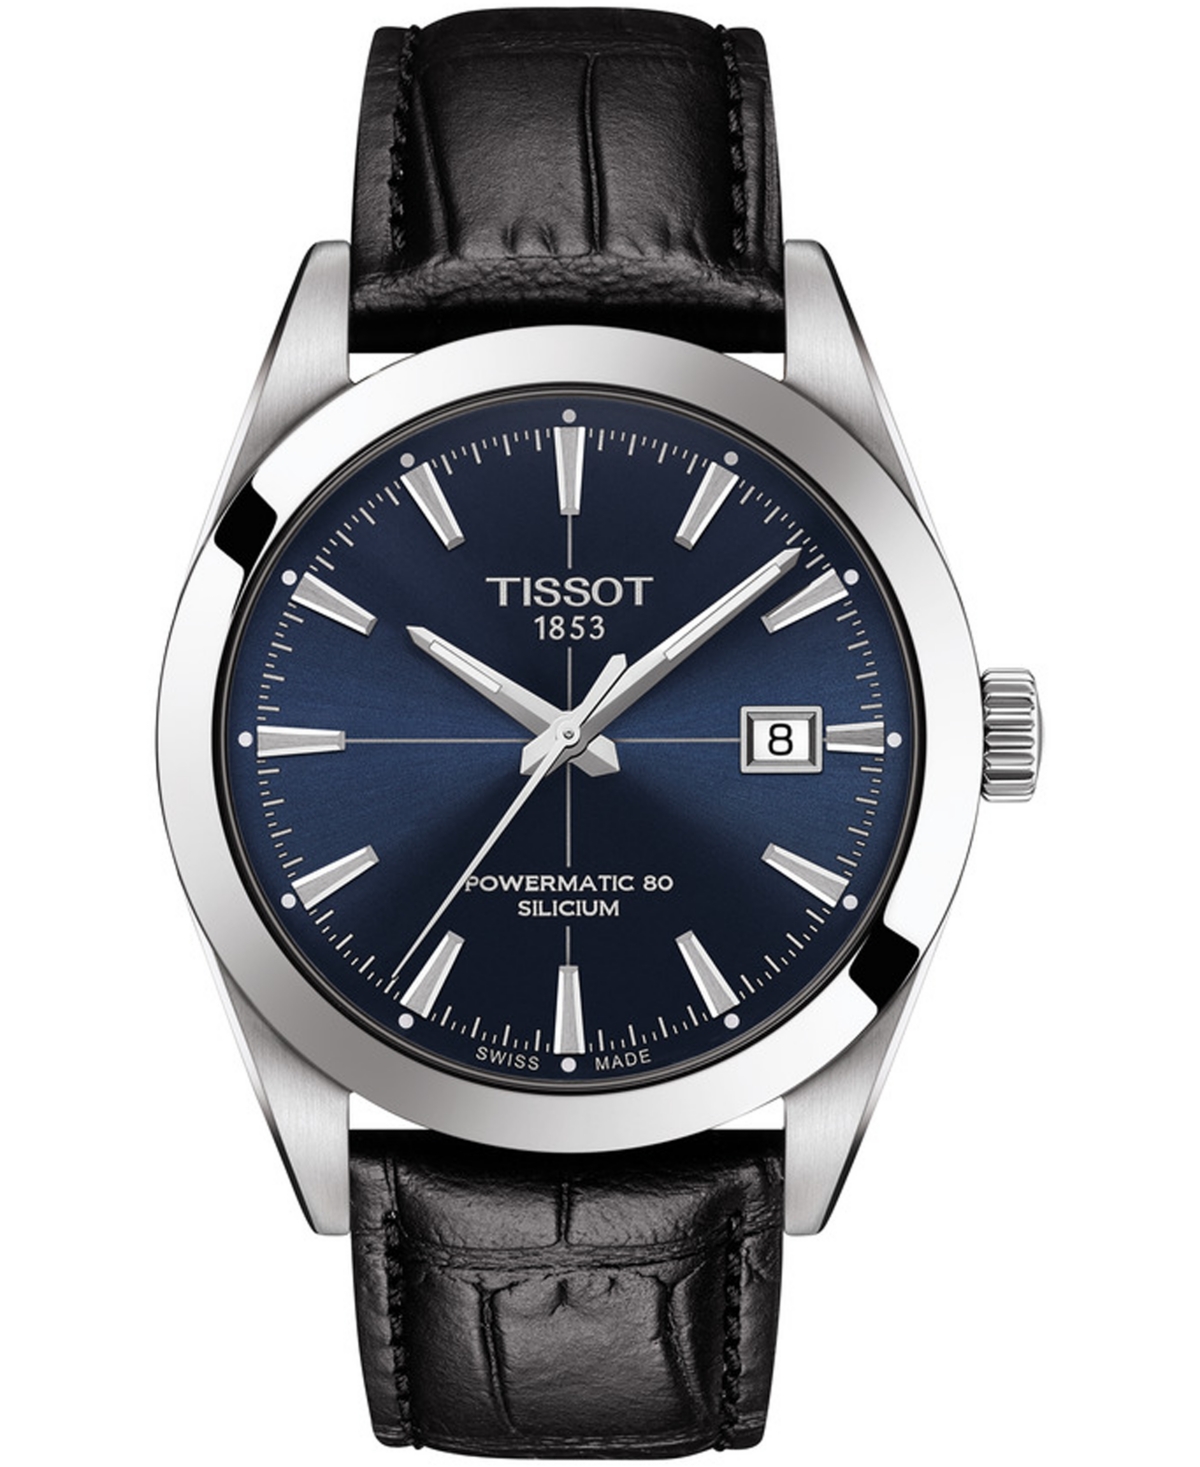 Tissot Men's Swiss Automatic Powermatic 80 Silicium Black Leather Strap Watch 40mm In Blue